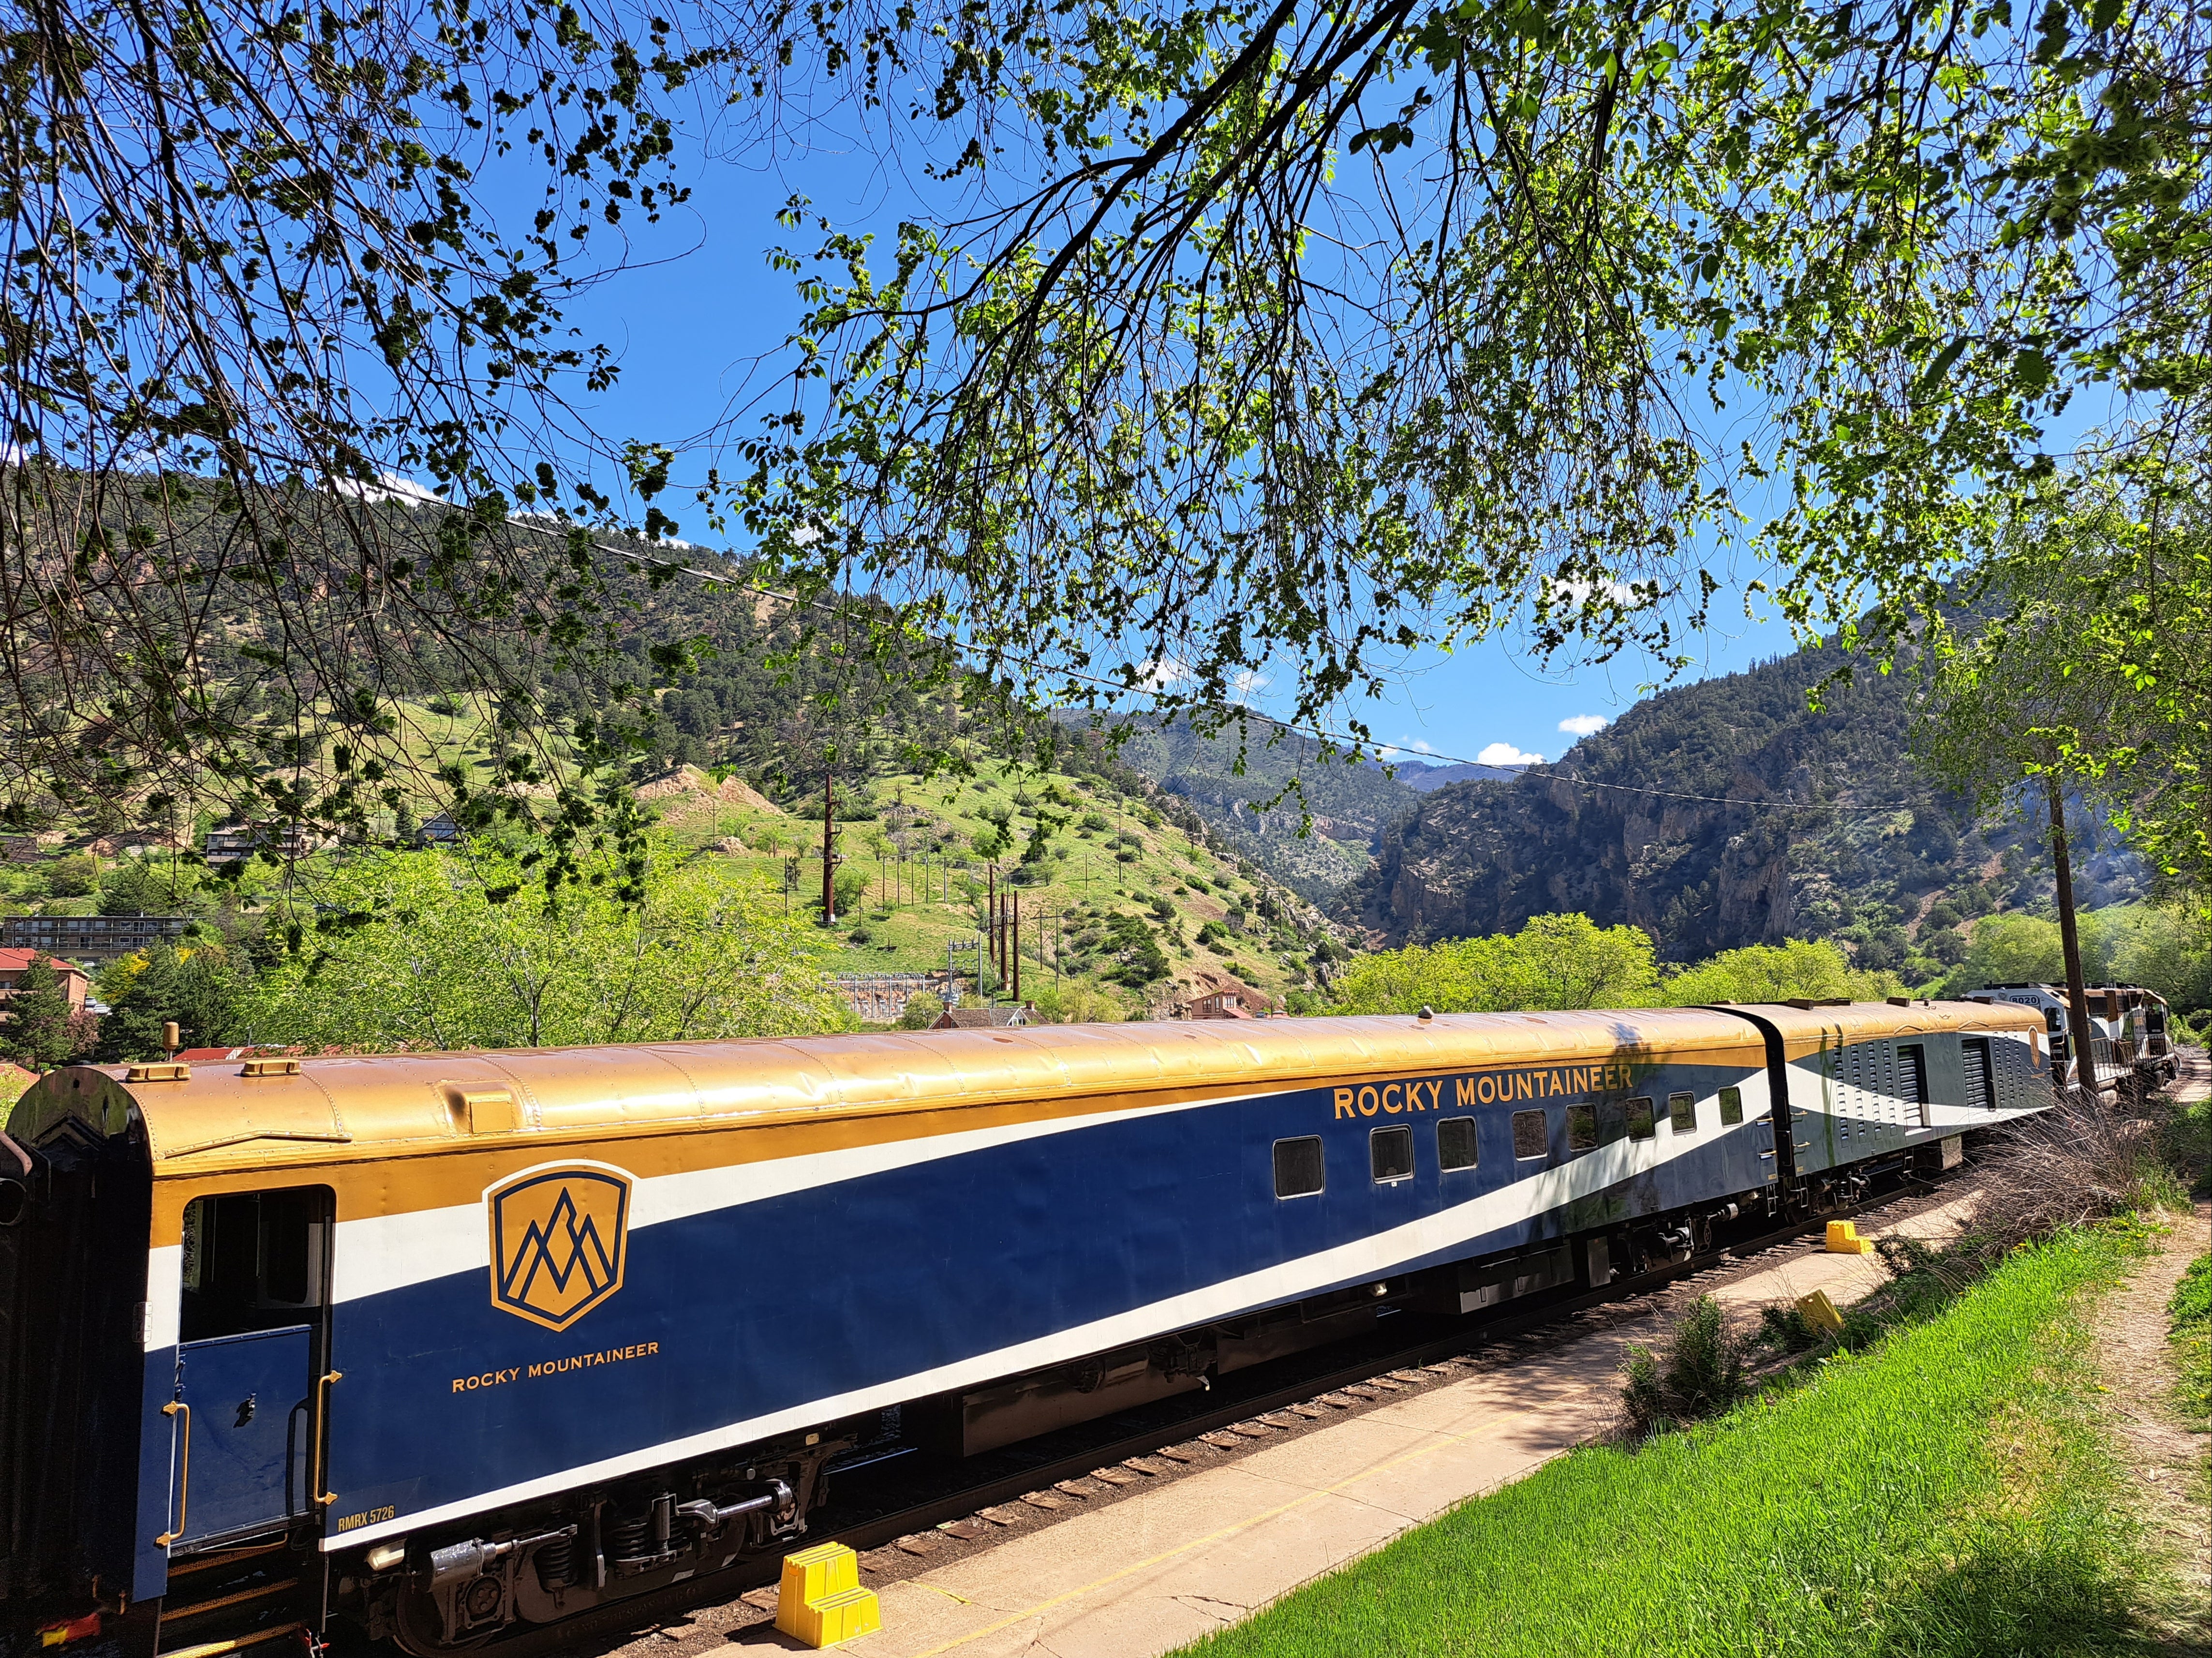 The Rocky Mountaineer in Glenwood Springs